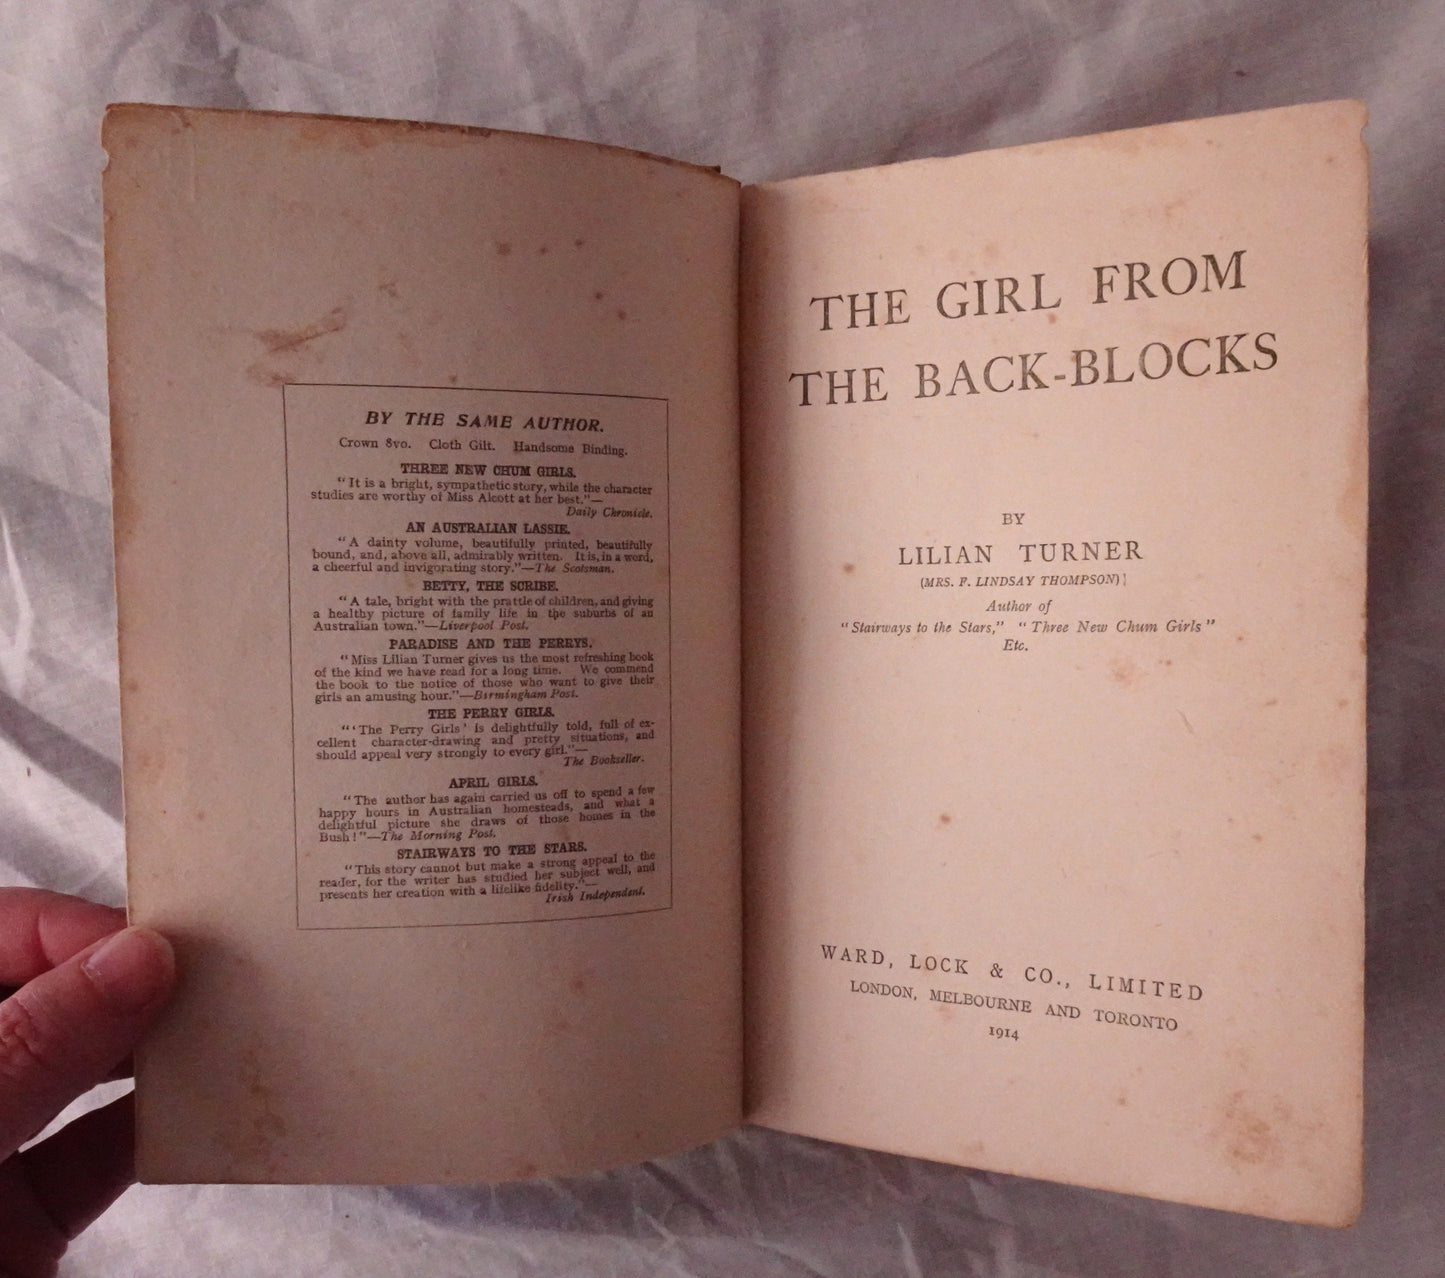 The Girl From the Back-Blocks by Lilian Turner